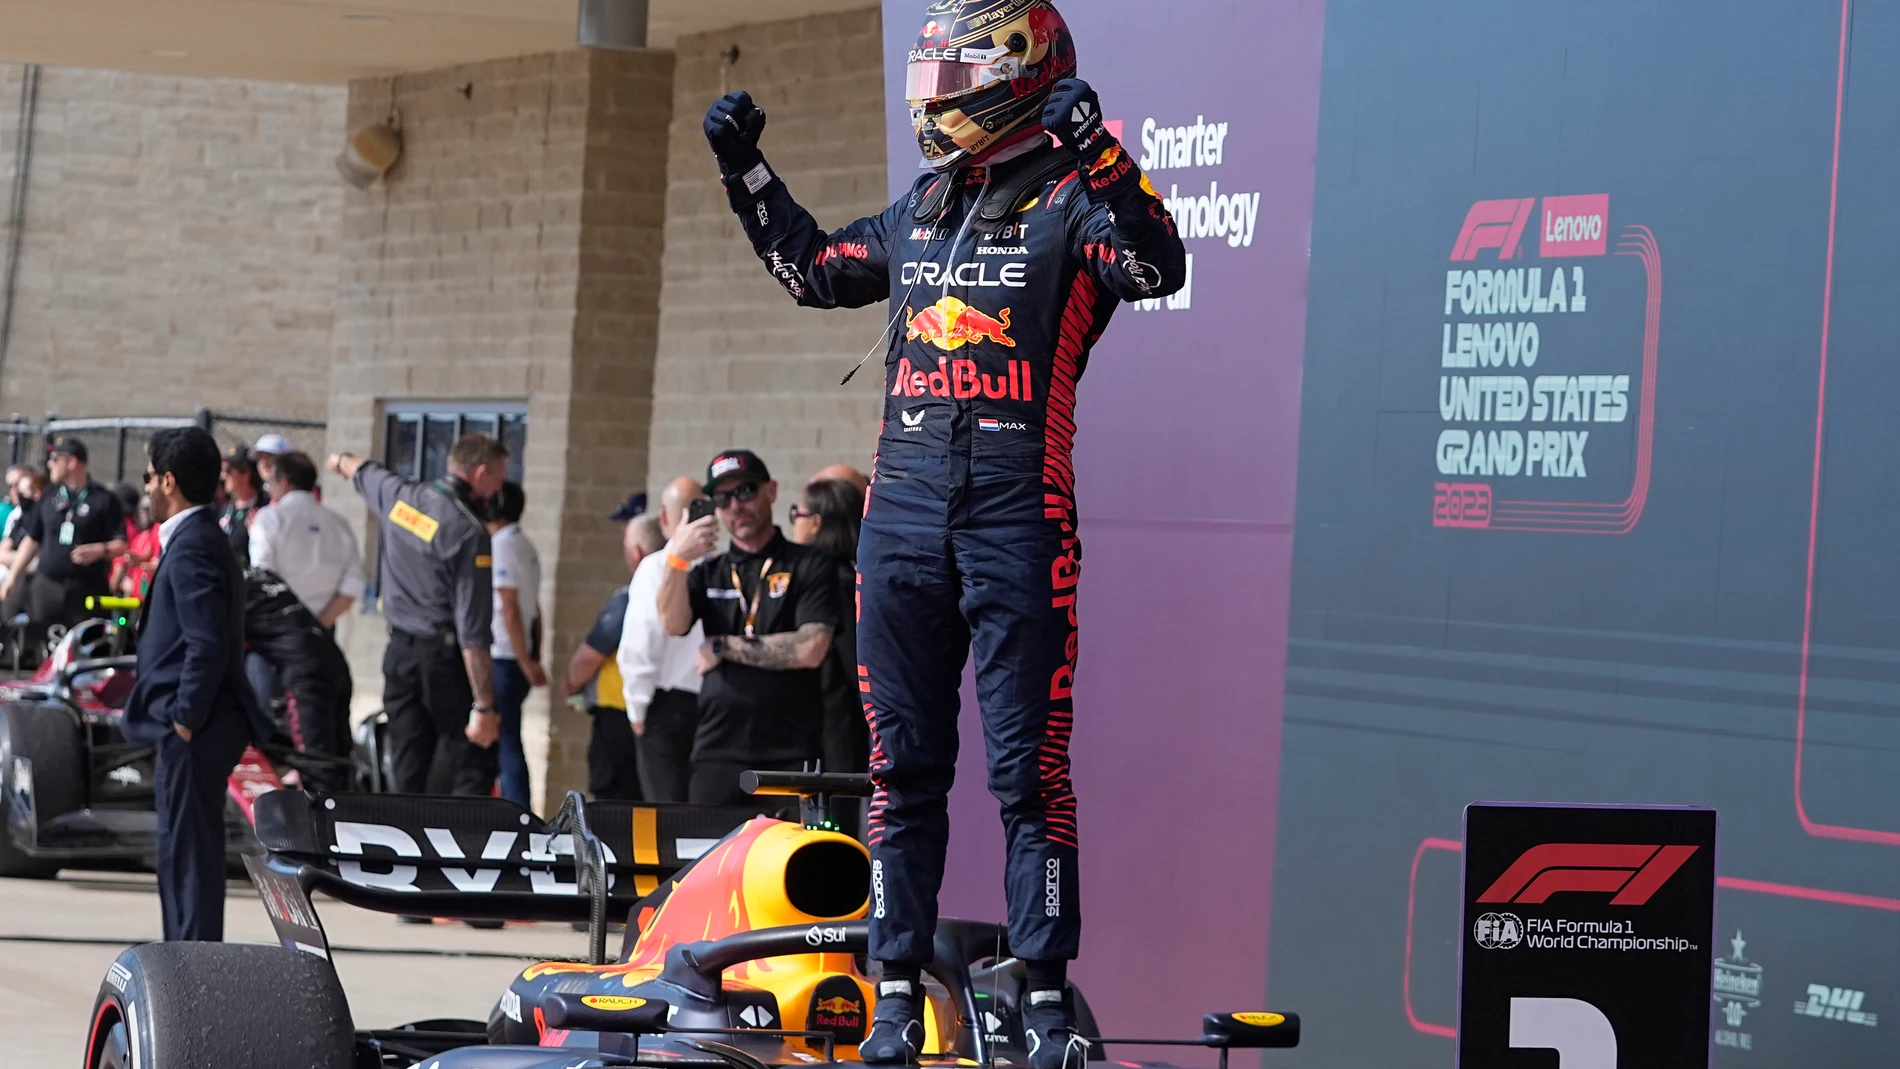 Red Bull driver Max Verstappen, of the Netherlands, celebrates after winning the Formula One U.S. Grand Prix auto race at Circuit of the Americas, Sunday, Oct. 22, 2023, in Austin, Texas. (AP Photo/Darron Cummings)